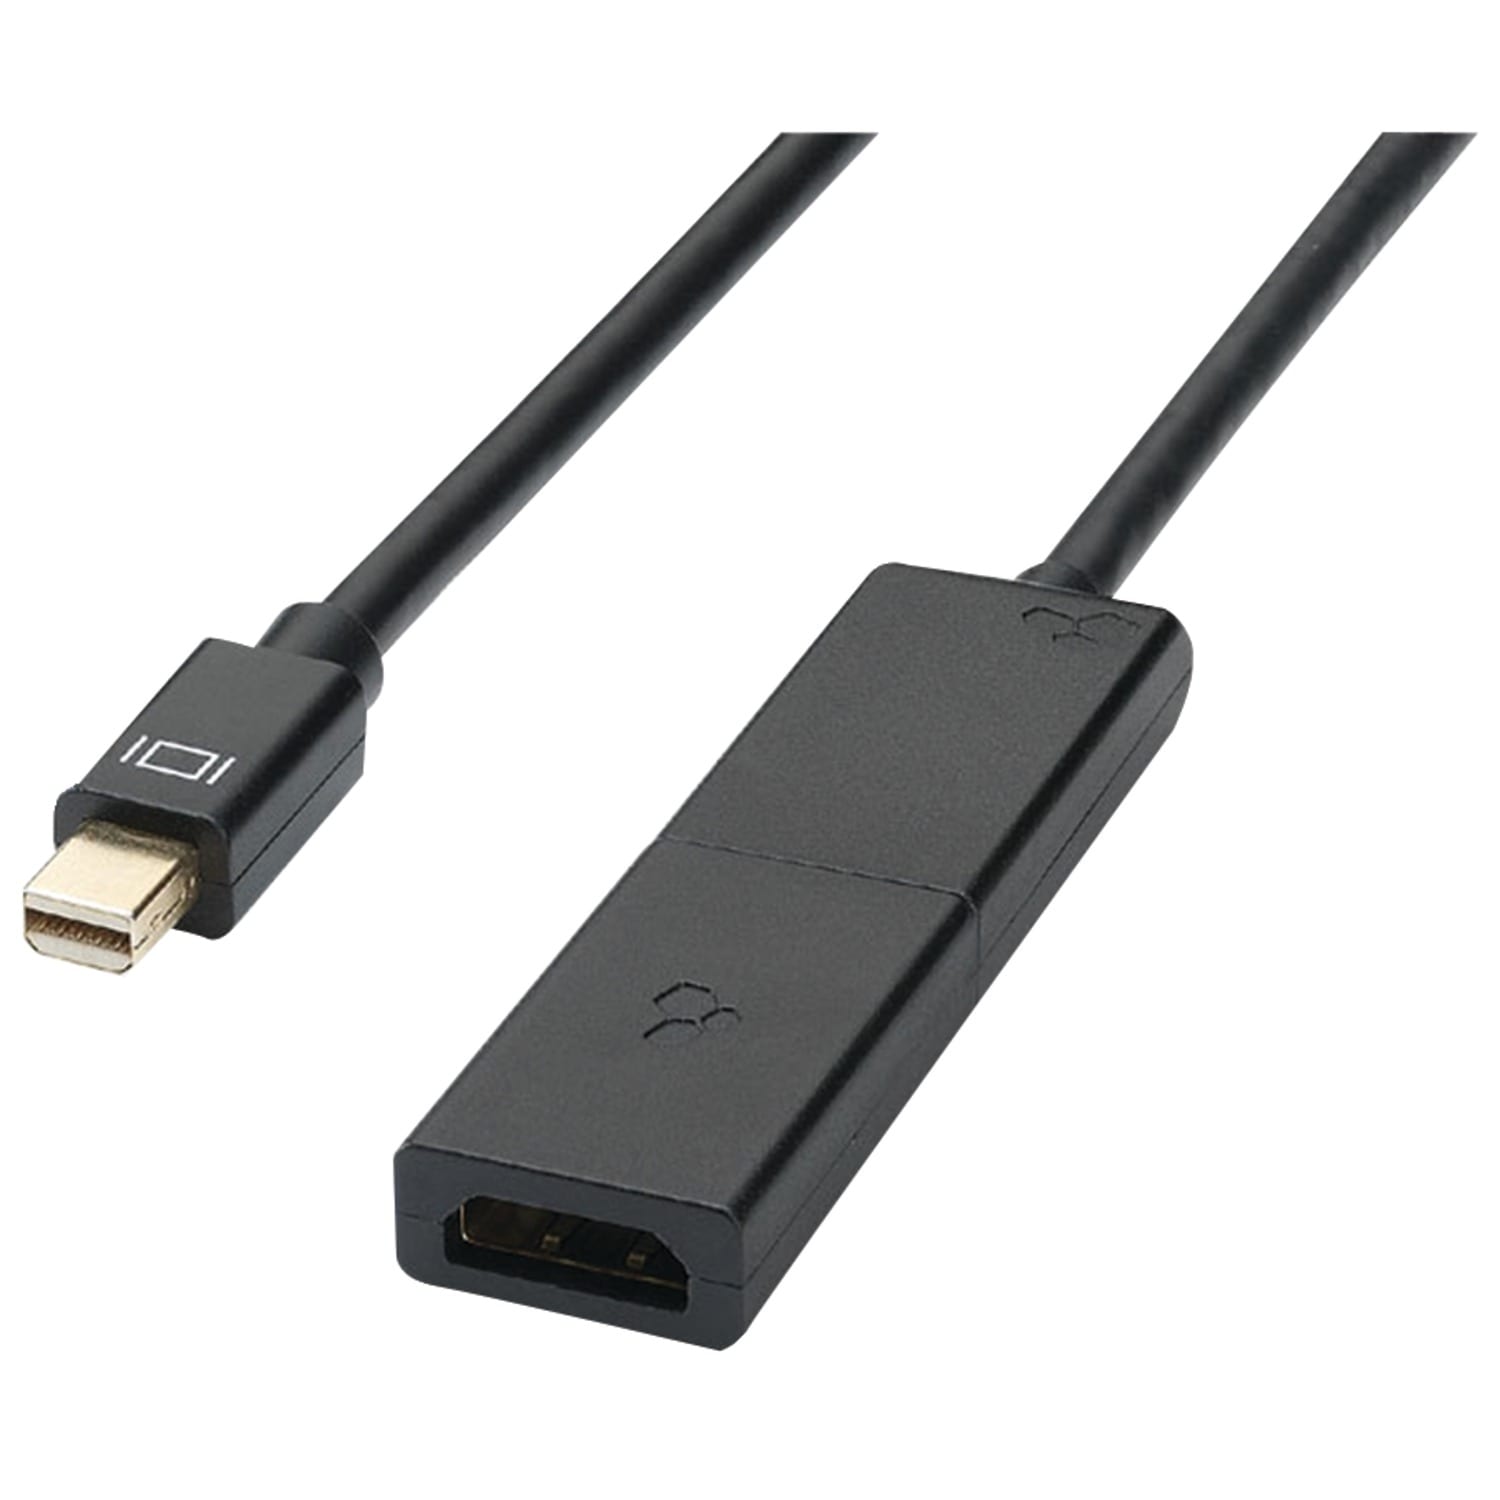 Kanex Mini DP 3m to HDMI Adapter Cable